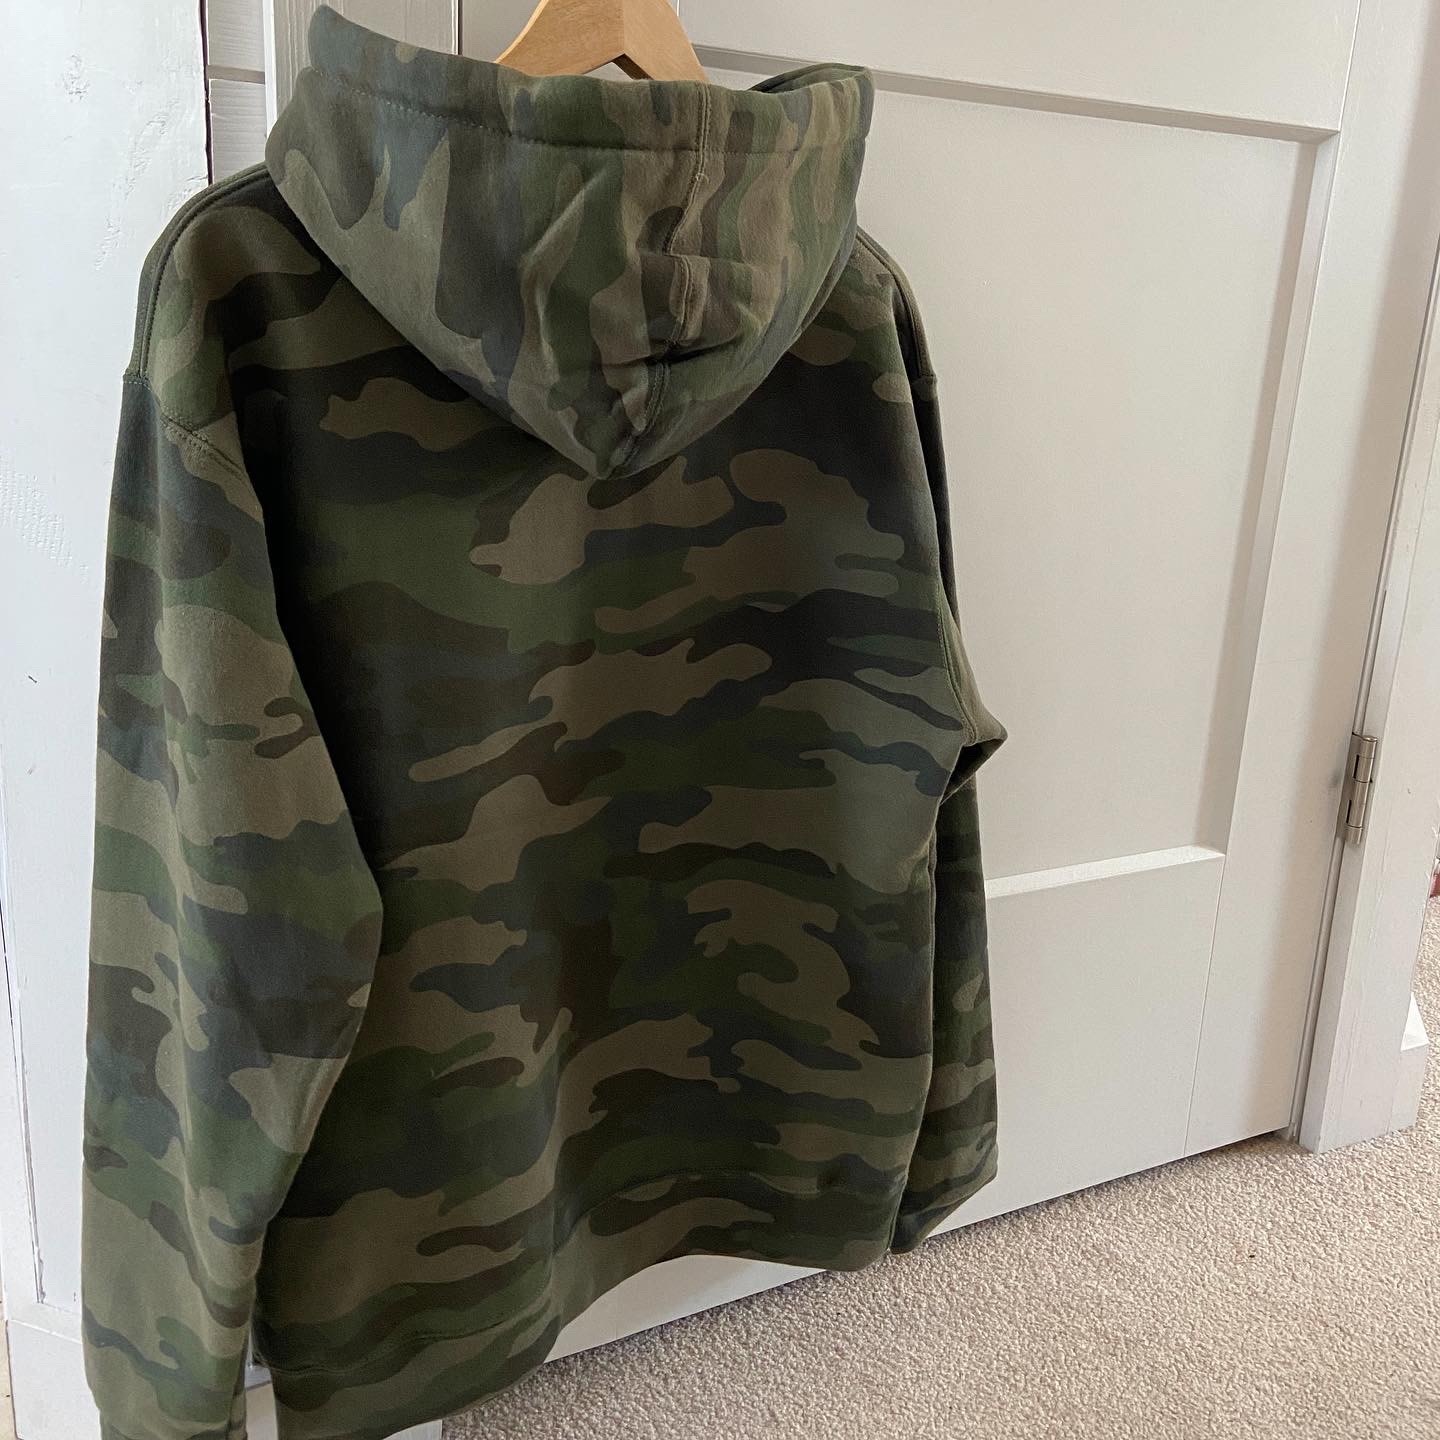 Independent Heavy weight Hooded Pullover Sweathirt (Forest Camo)